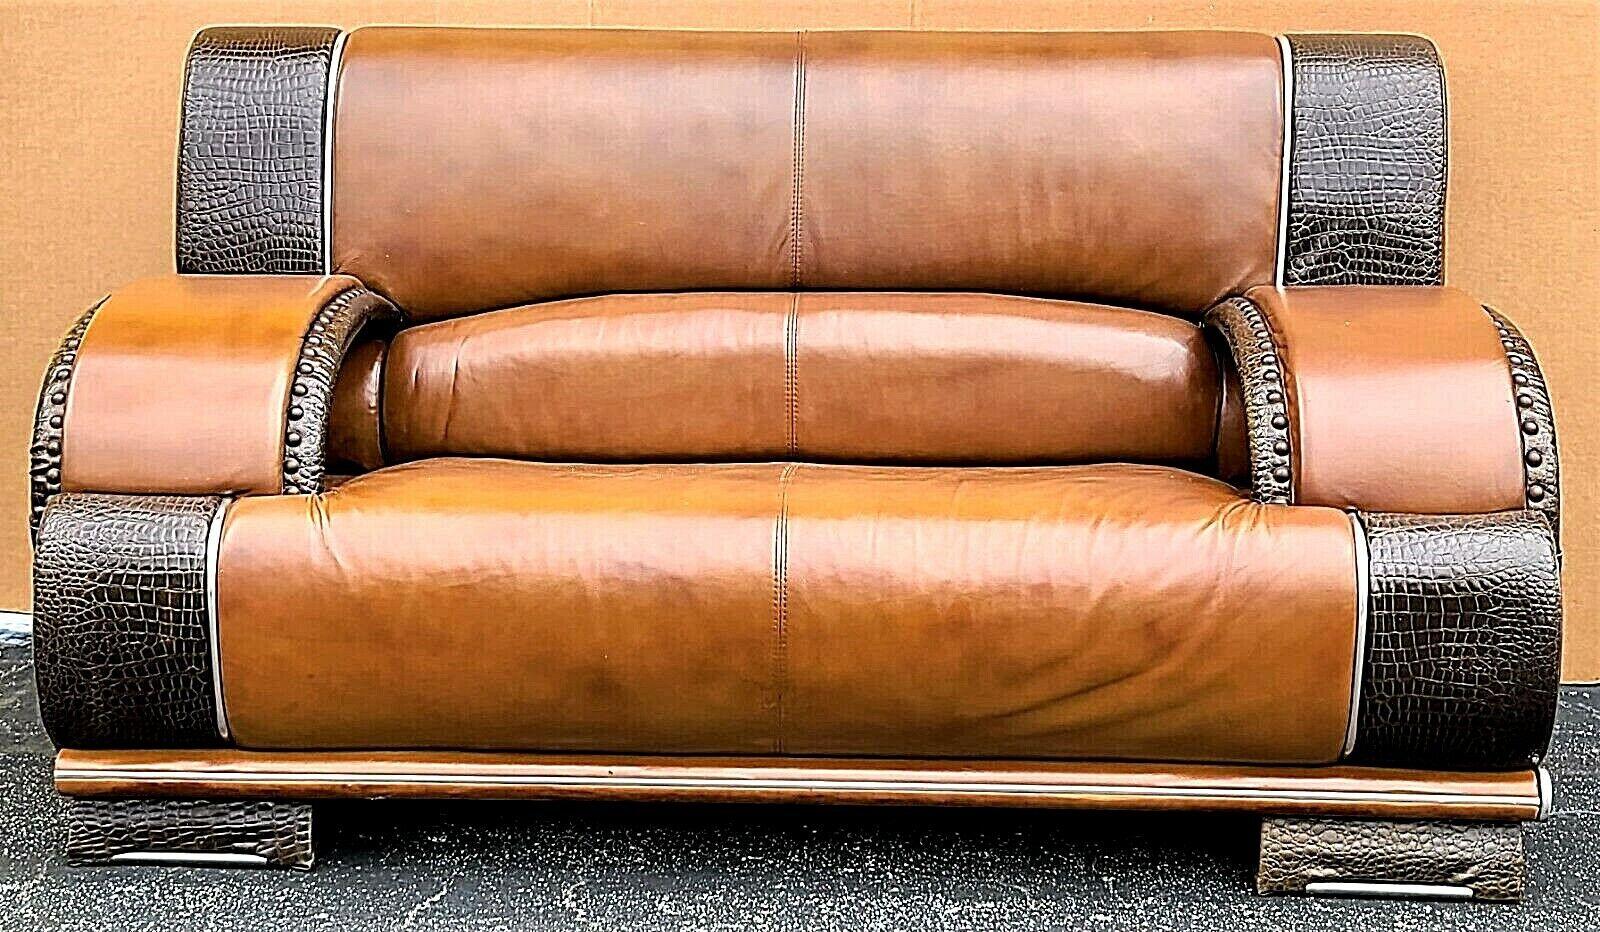 For FULL item description click on CONTINUE READING at the bottom of this page.

Offering one of our recent palm beach estate fine furniture acquisitions of an
exceptional and very comfortable vintage custom made leather and alligator settee